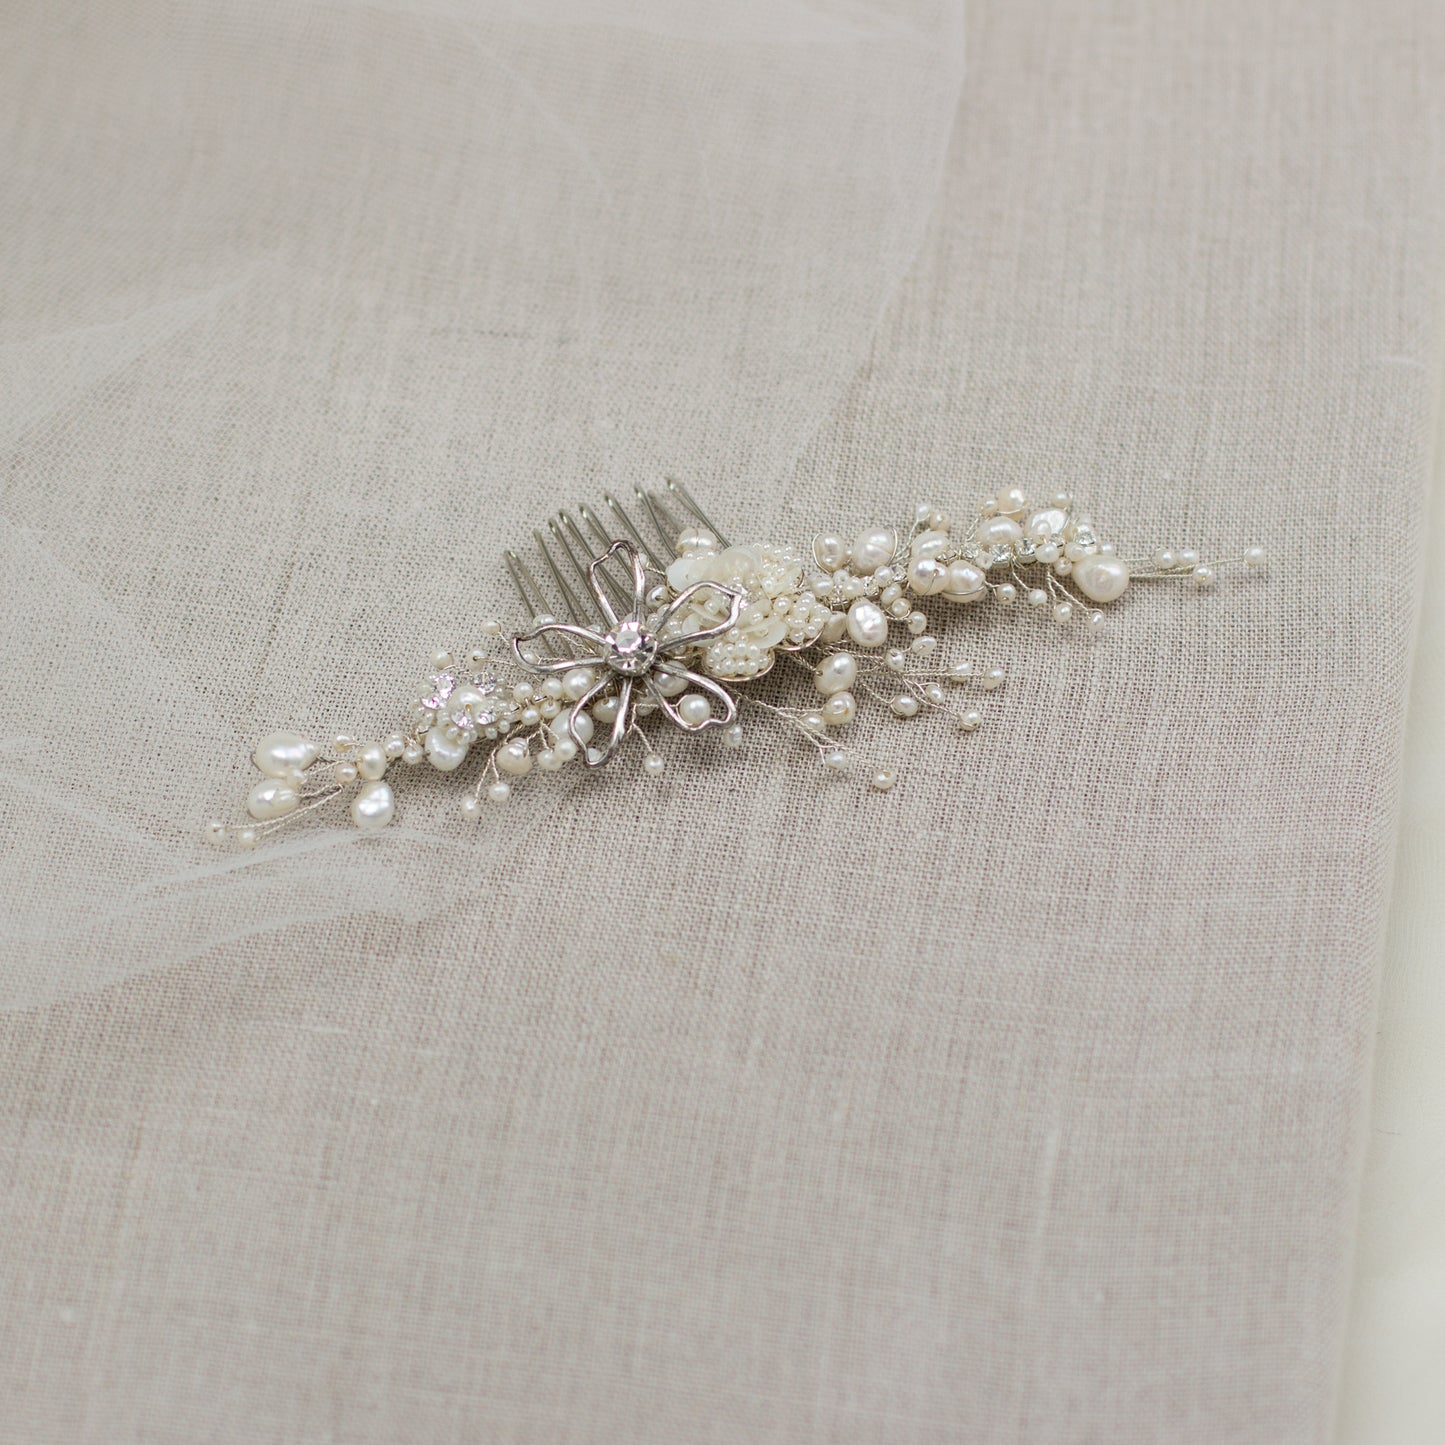 Explore unique handmade bridal hair accessories at our online boutique in Europe. This beautiful one of a kind pearl hair comb, bridal hair adornment, crystal wedding headpiece feature floral motifs, pearl twigs decorated with crystals. Perfect for your occasion or special day.